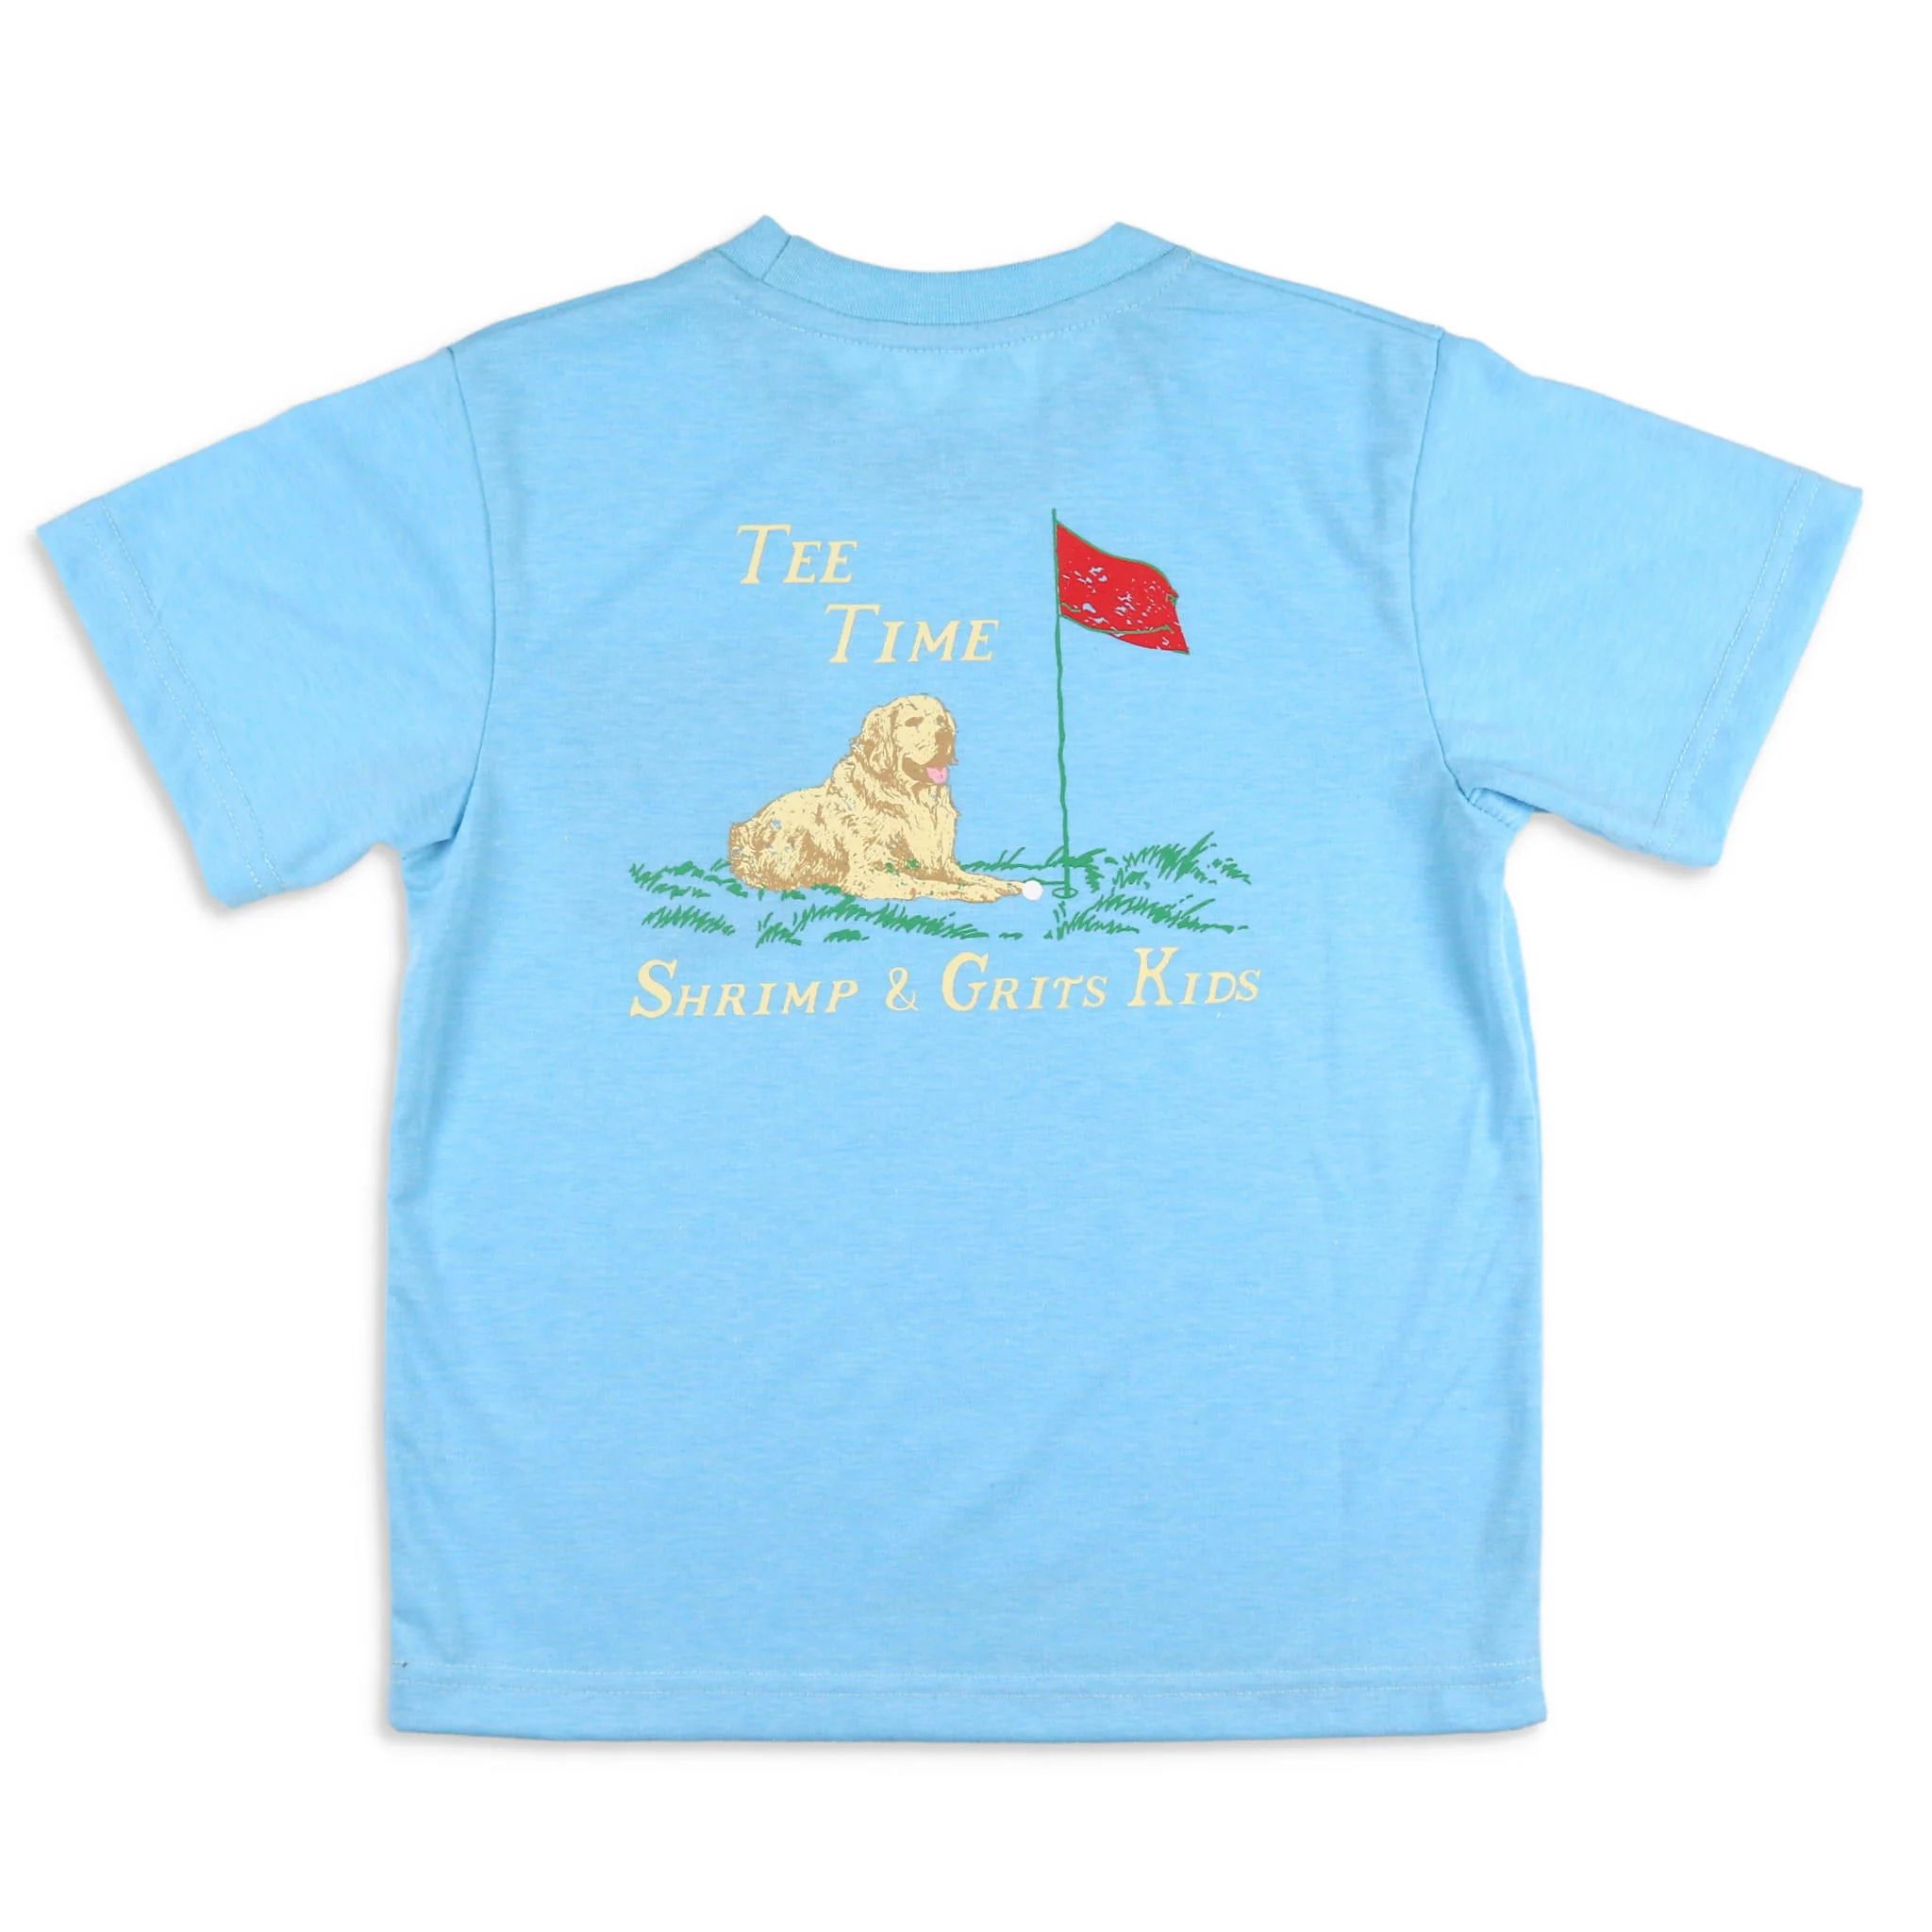 Boys Tee Time Graphic Tee - Shrimp and Grits Kids | Shrimp and Grits Kids